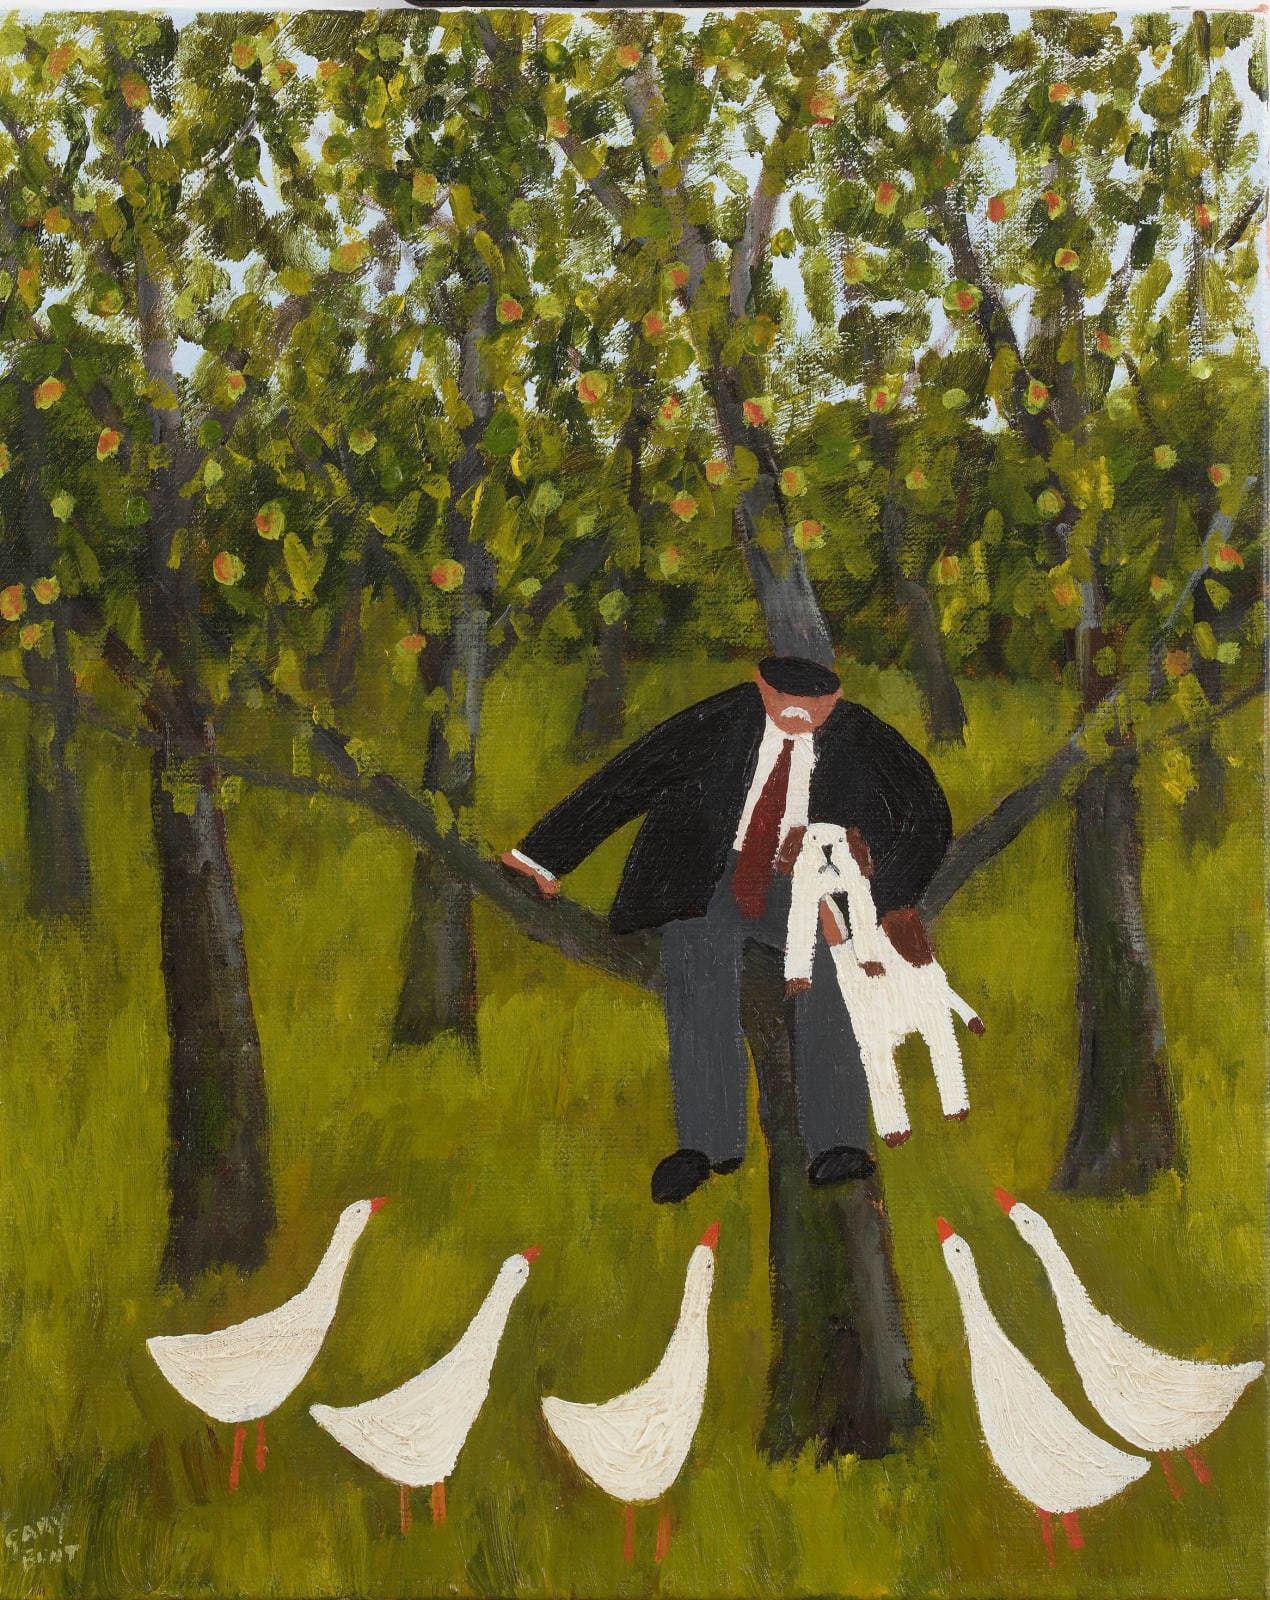 Gary Bunt, The Orchard